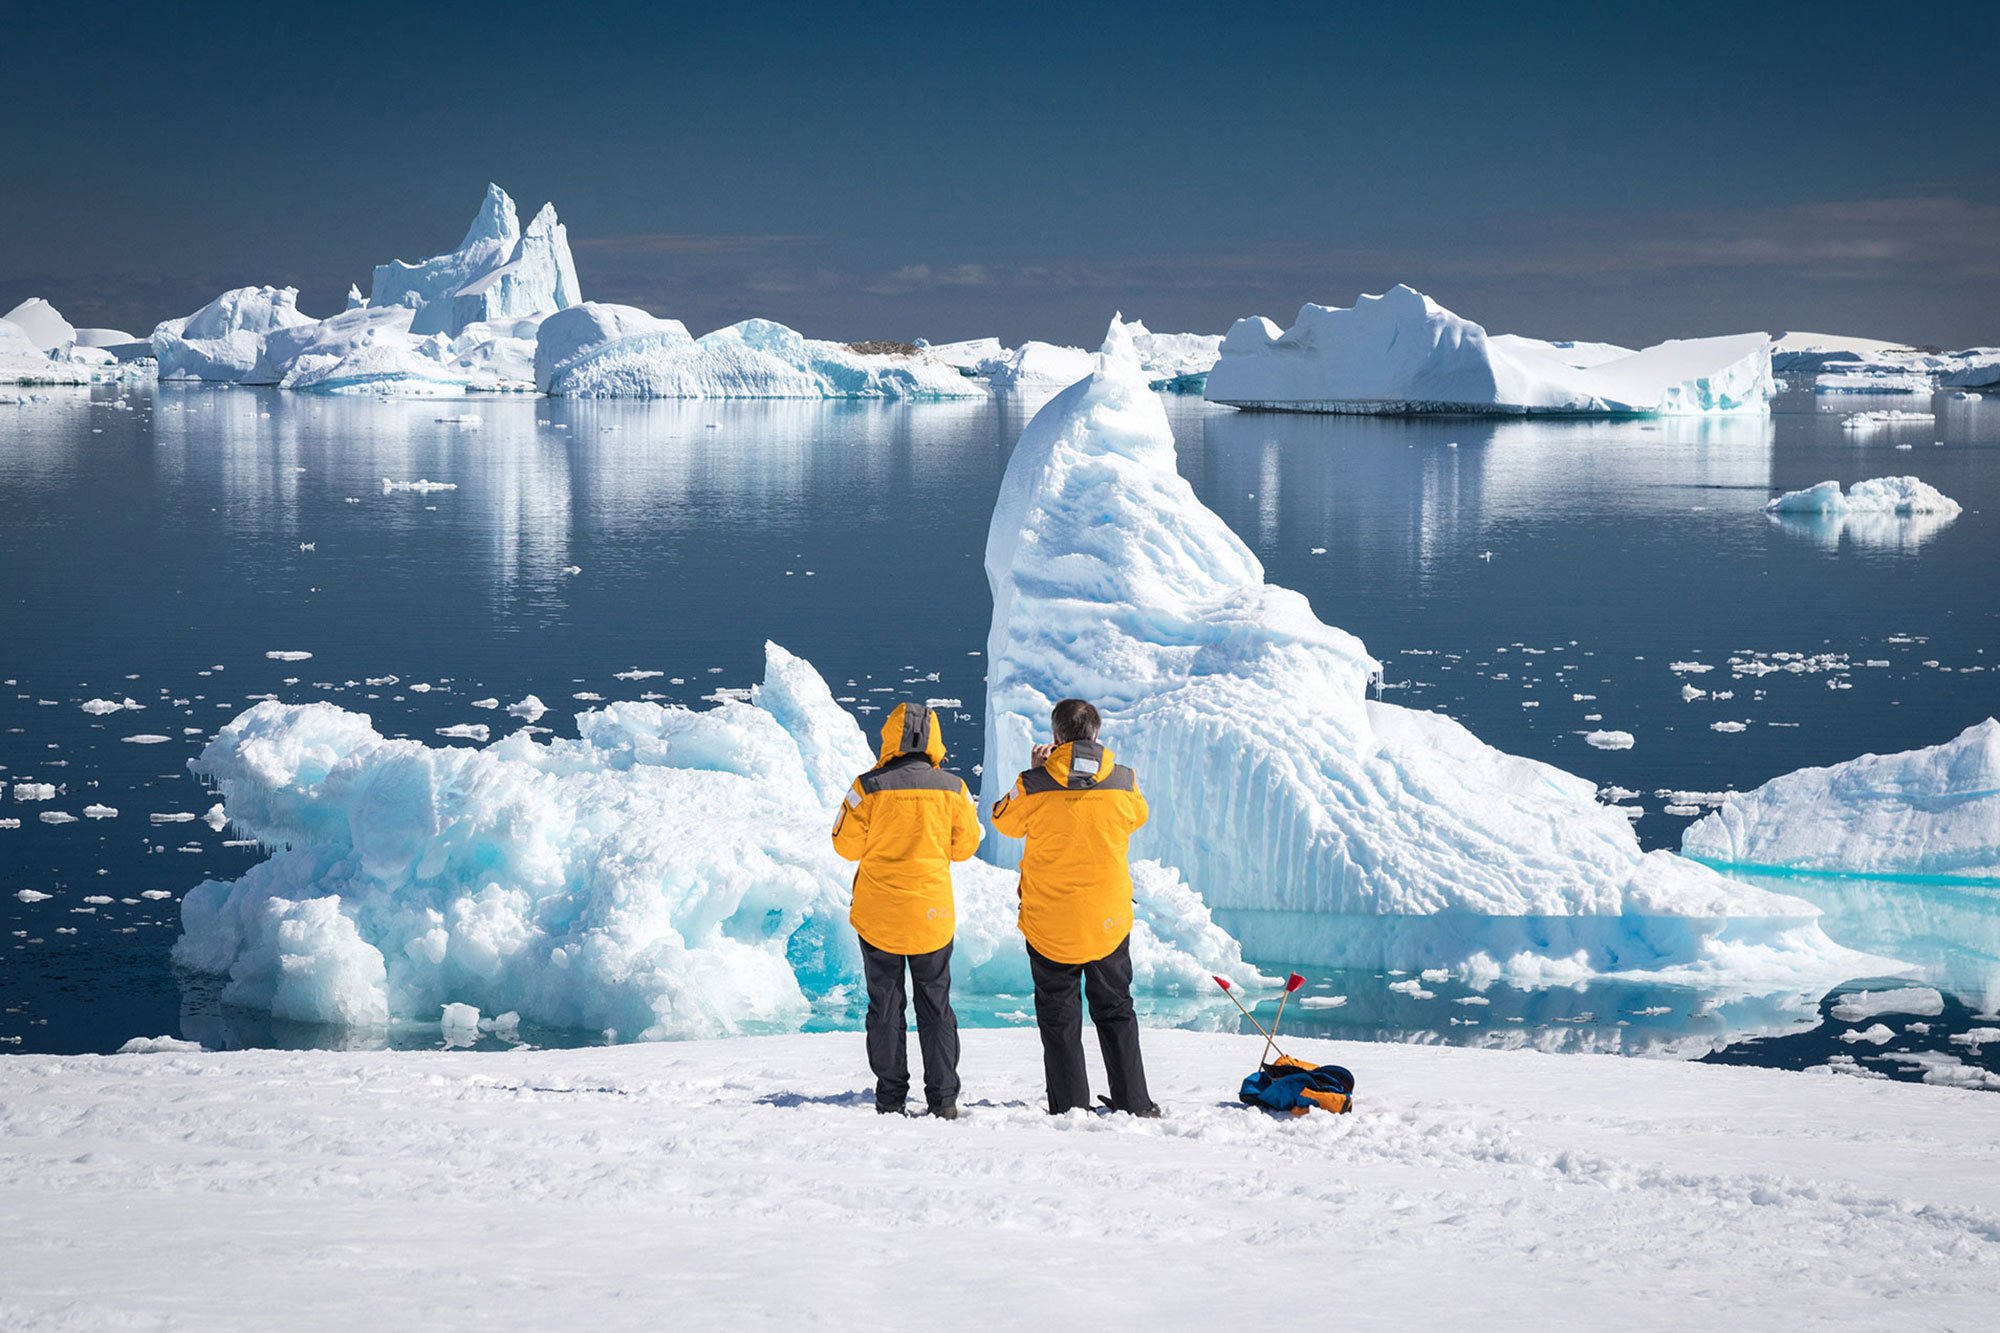 Quark Expeditions guests photograph ice formations at Port Charcot Bay, Antarctica.